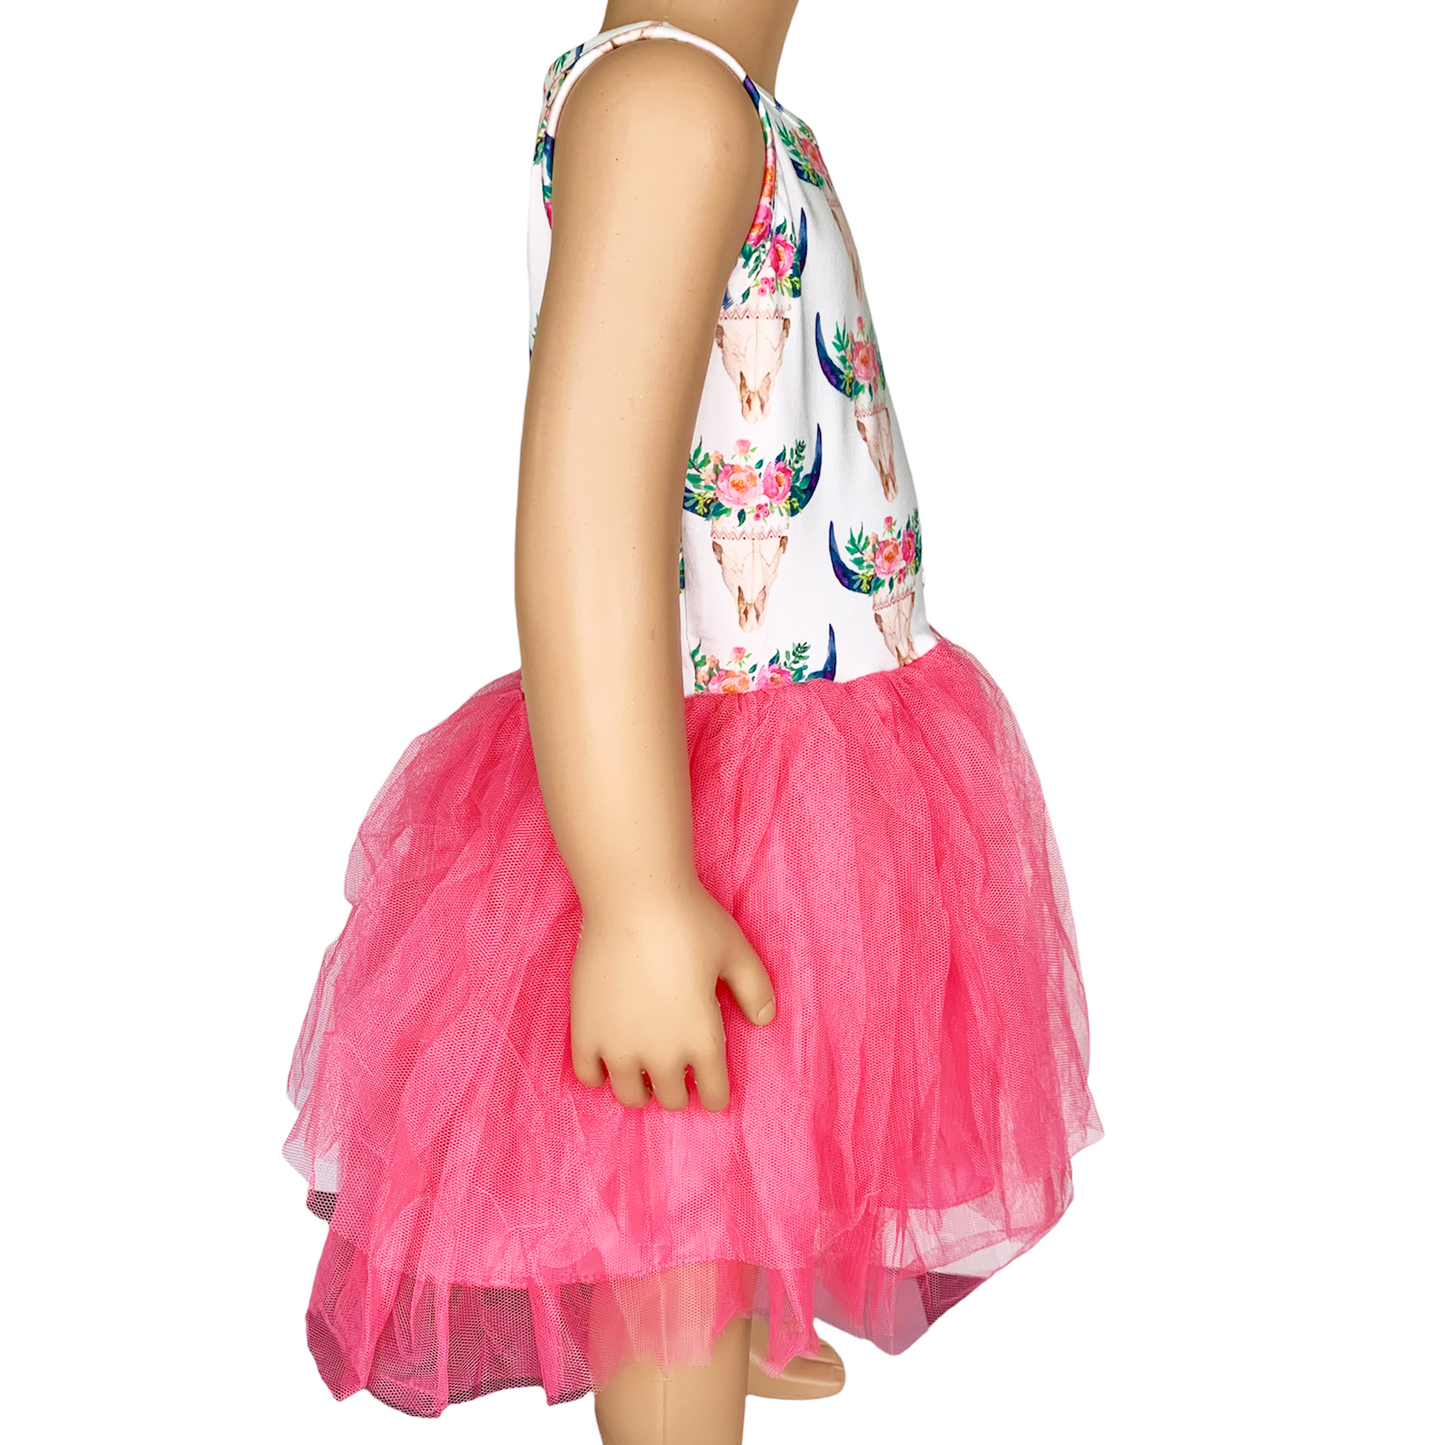 Girls South Western Pink Rose PinkTulle Party Dress Fit and Flare